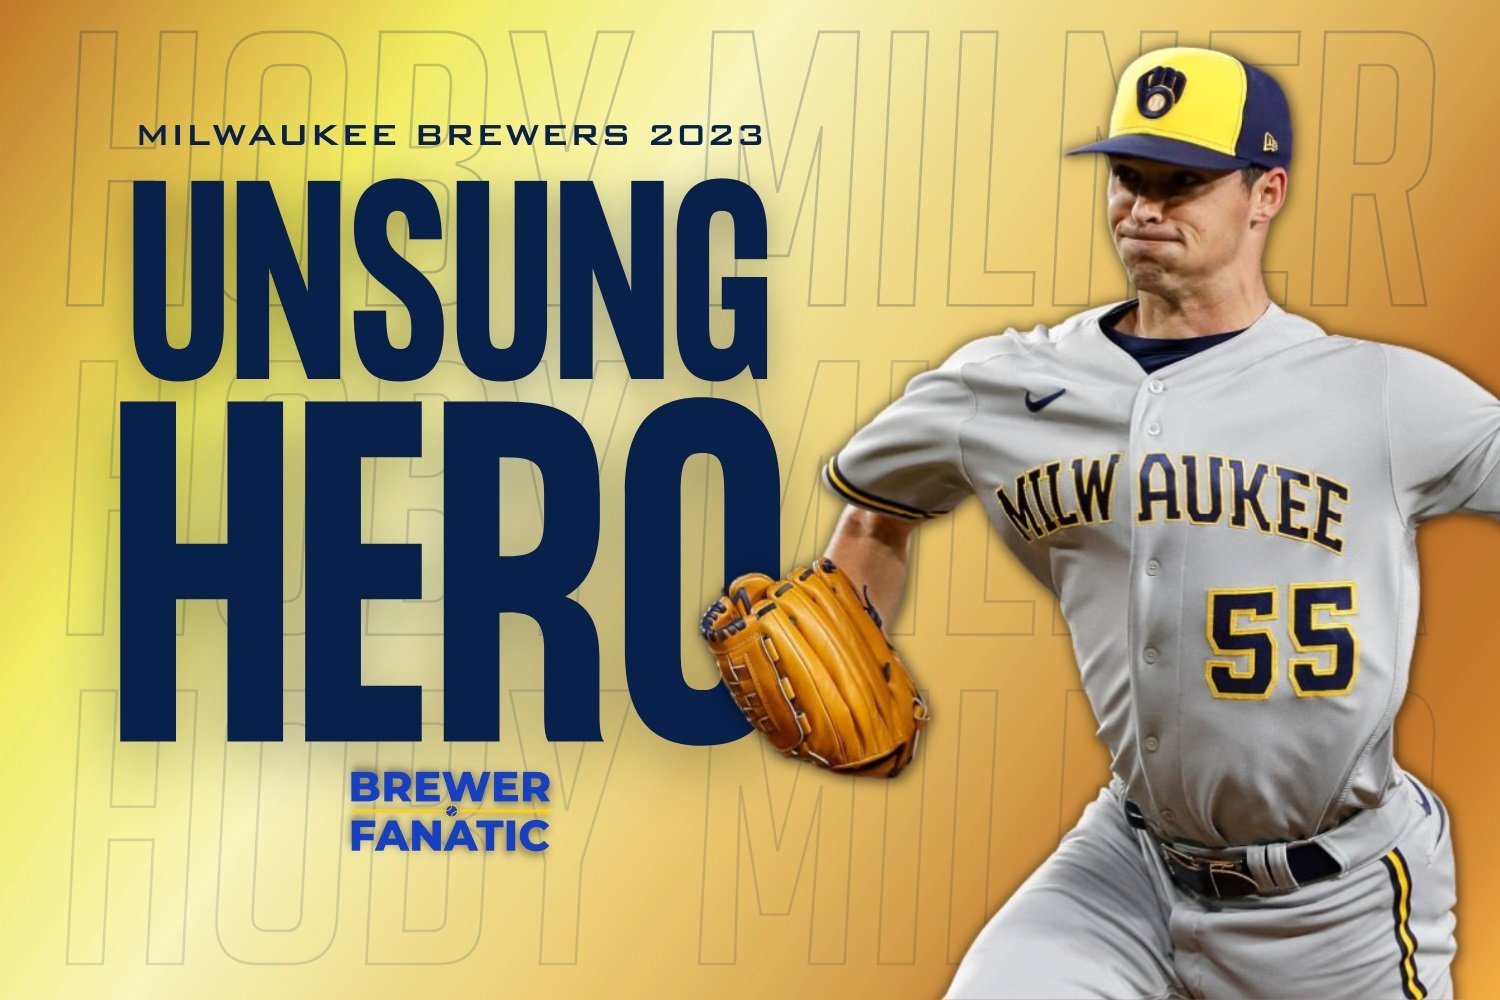 What will MIlwaukee Brewers' opening day roster look like in 2023?